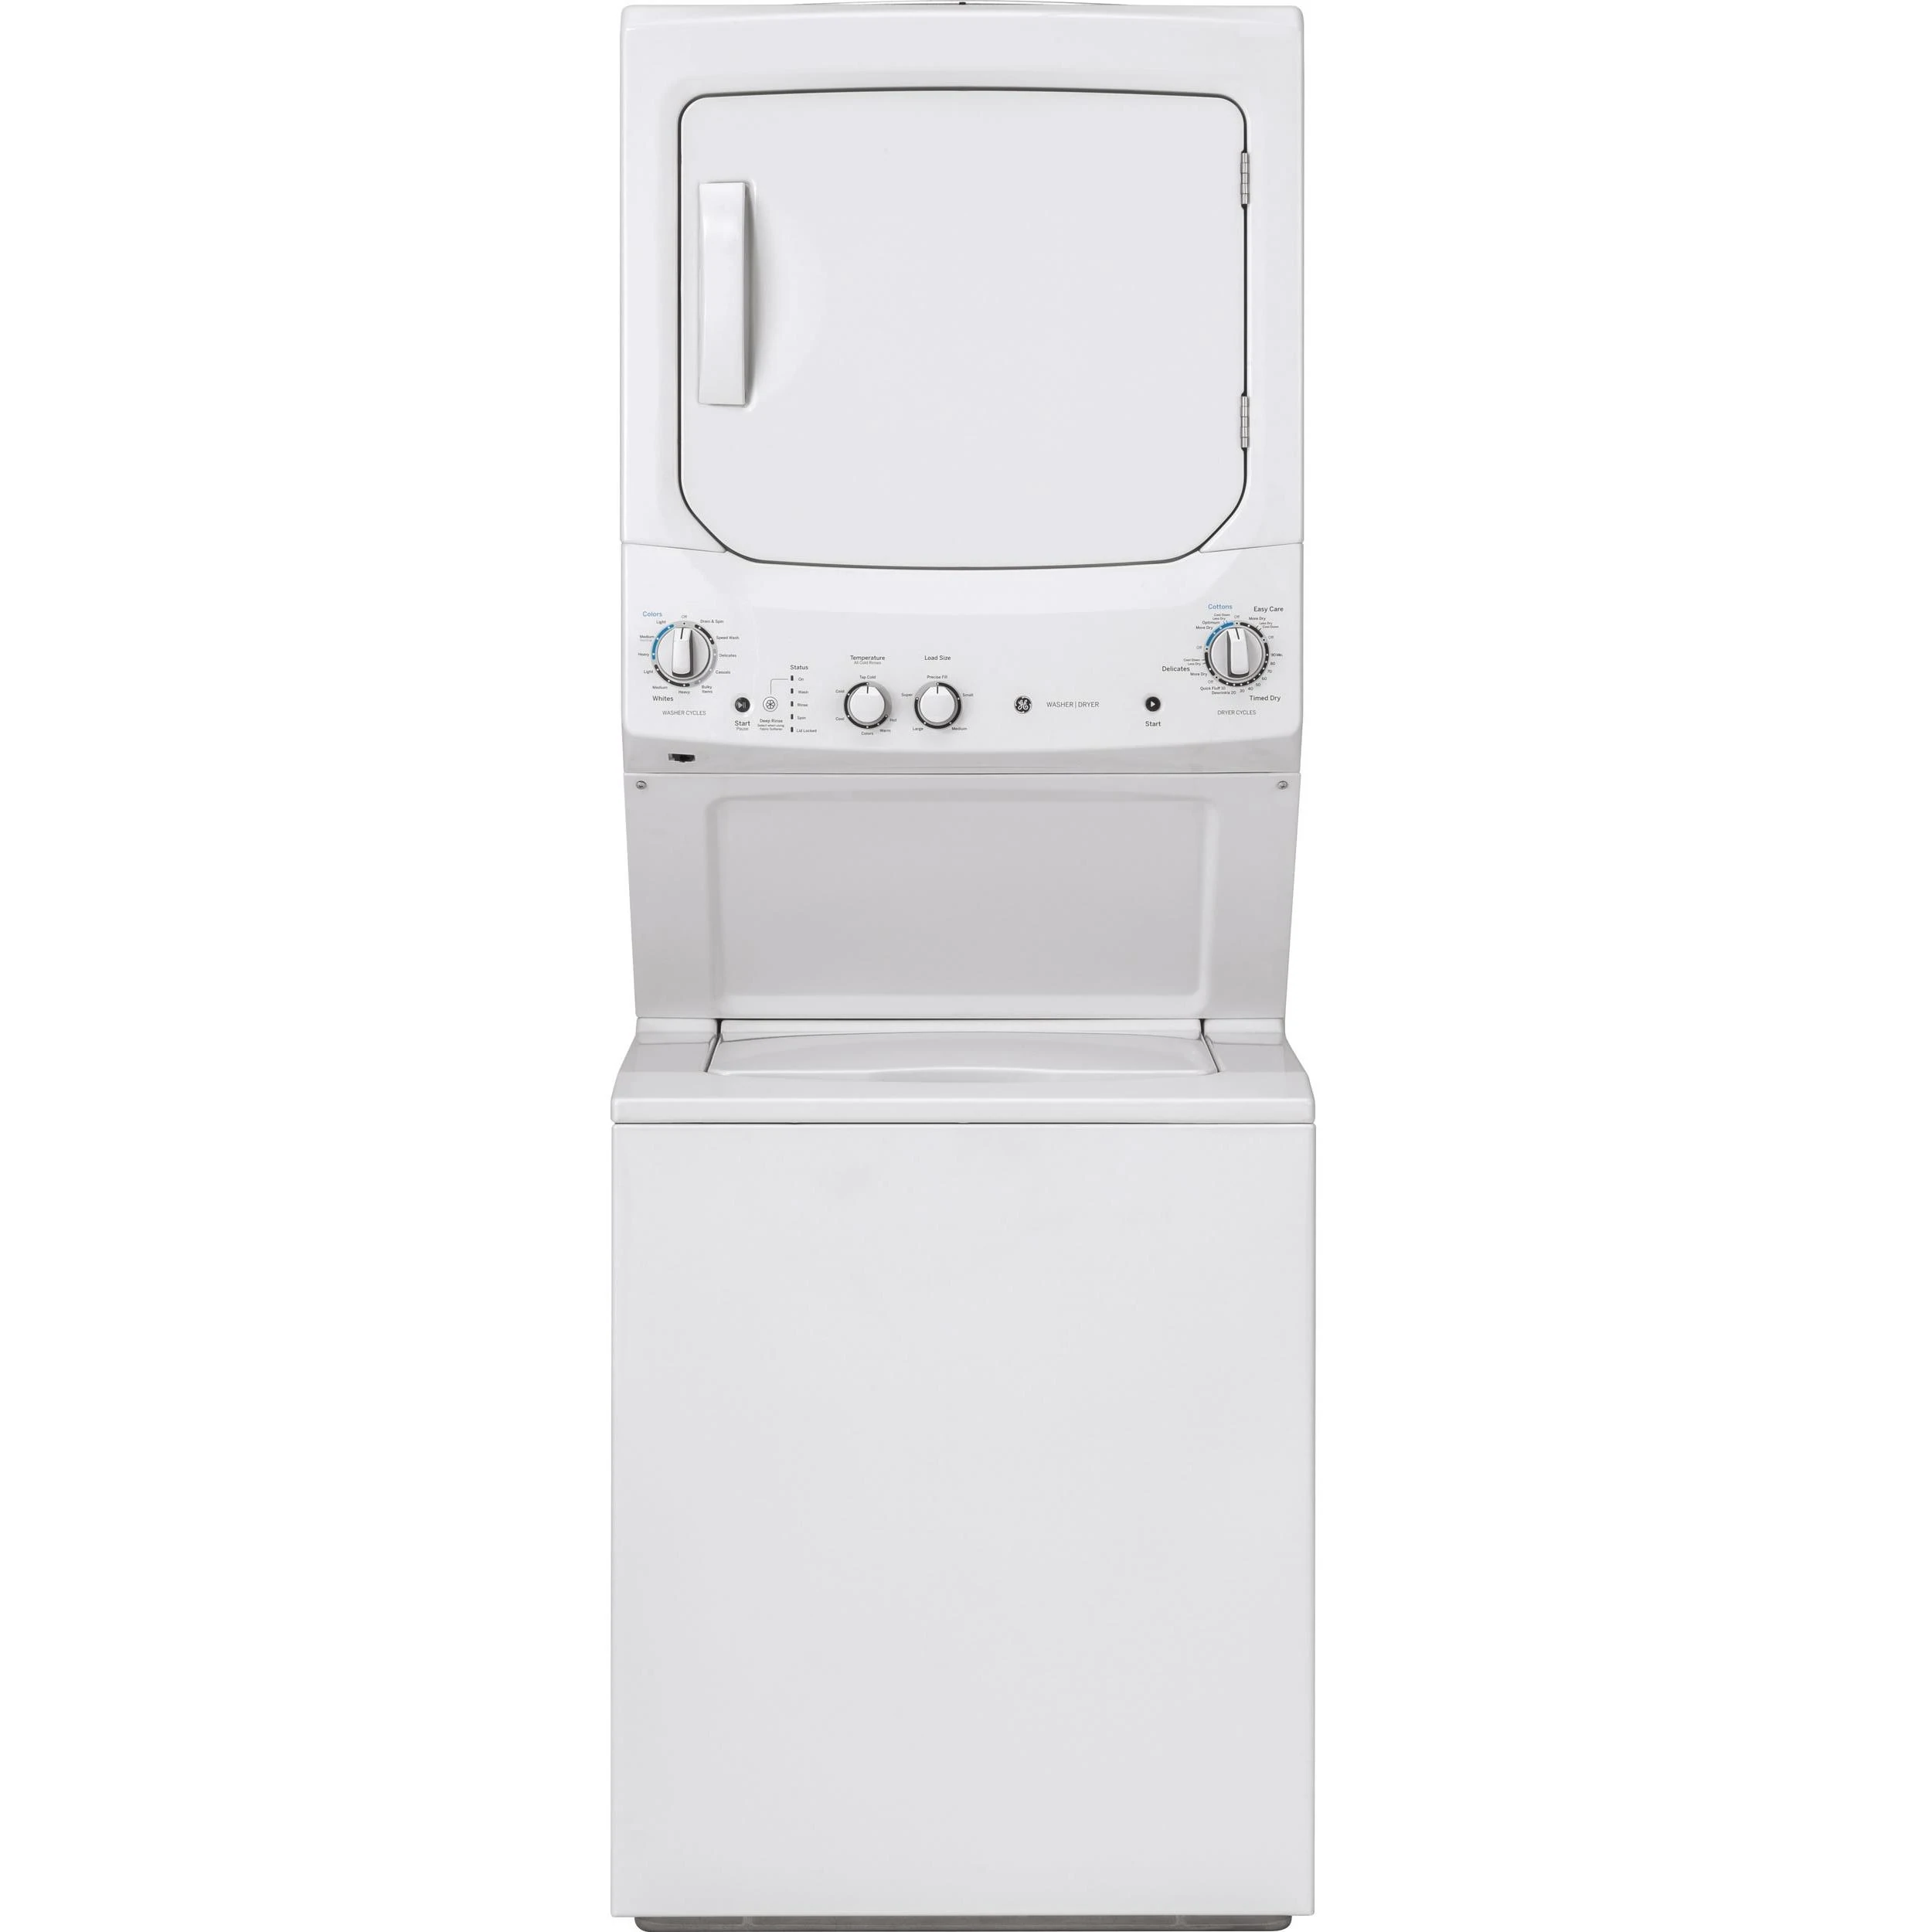 GUD27ESMMWW - LAUNDRY CENTERS - GE - Stacked Washer/Dryer - White - Open Box - Laundry centers - BonPrix Électroménagers